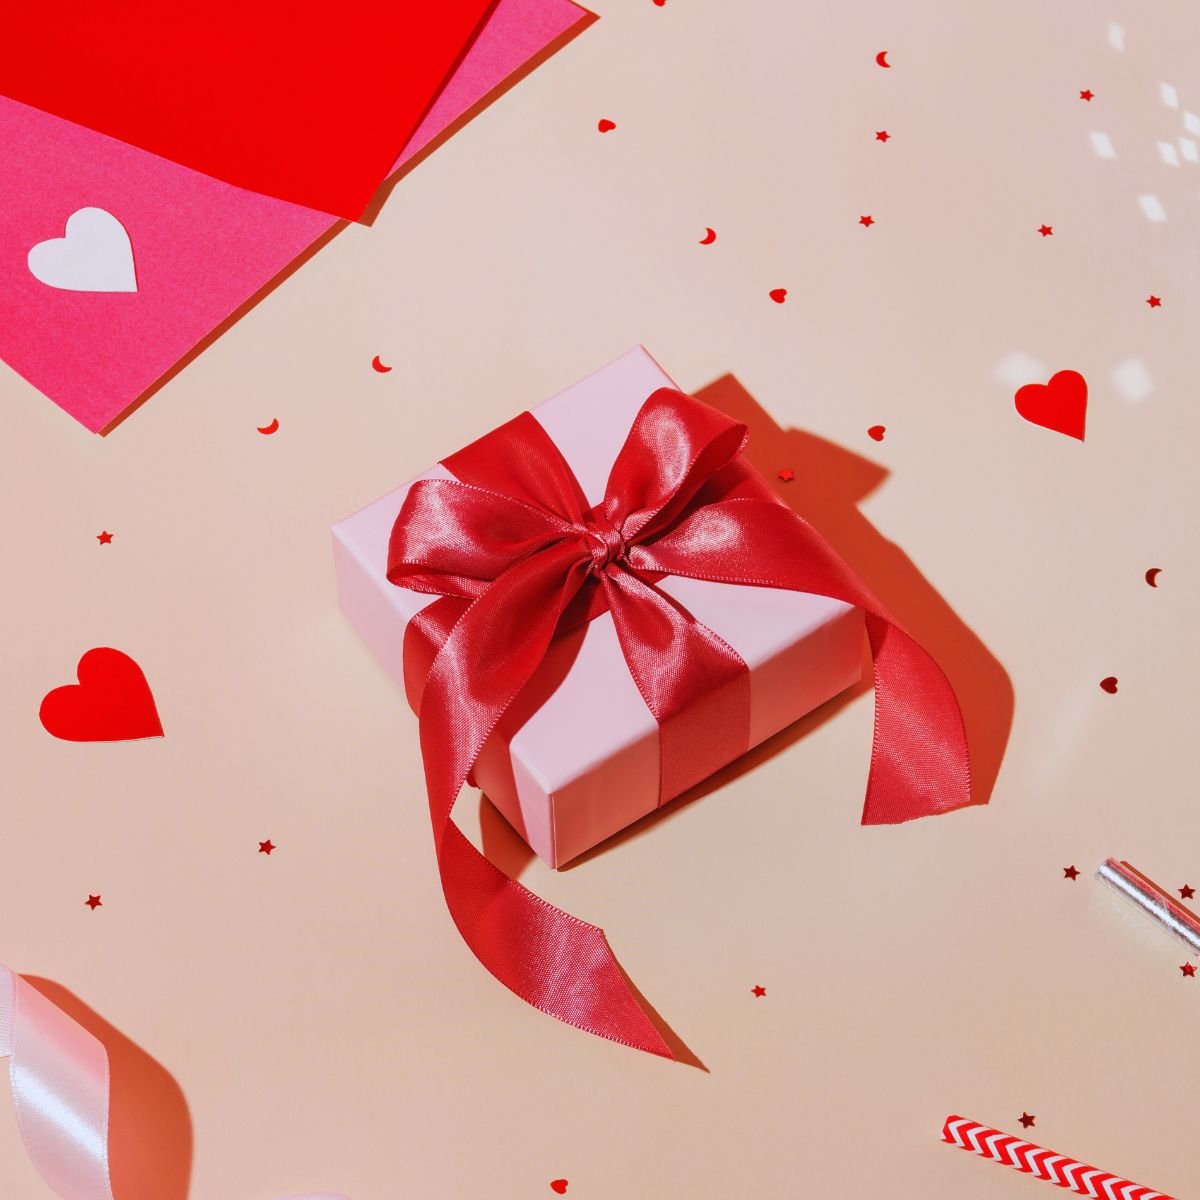 Get the Valentine’s Presents You Need by Sending Your Associate These Hyperlinks